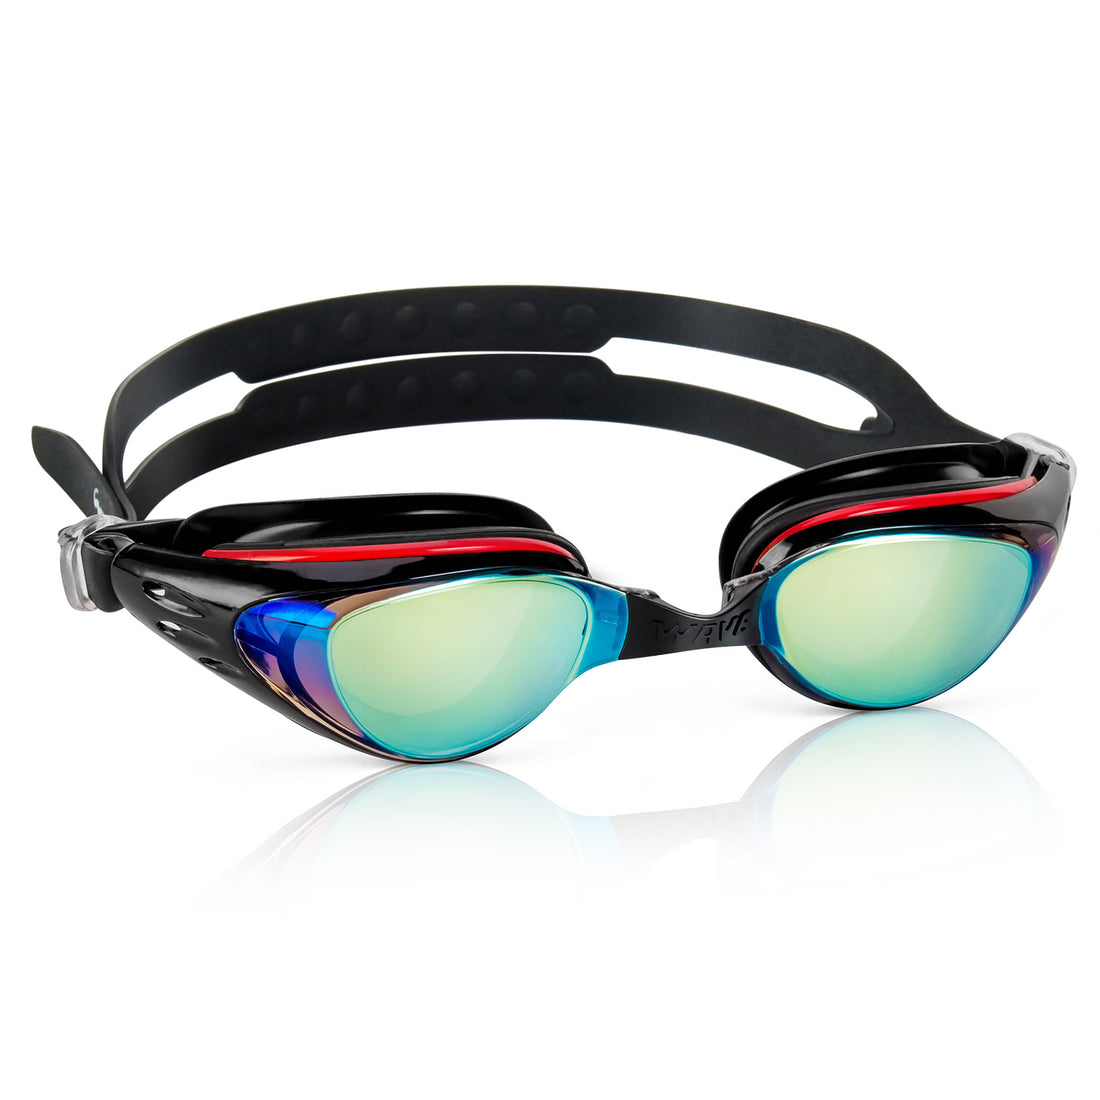 How should I choose the right swimming goggles for my first swim